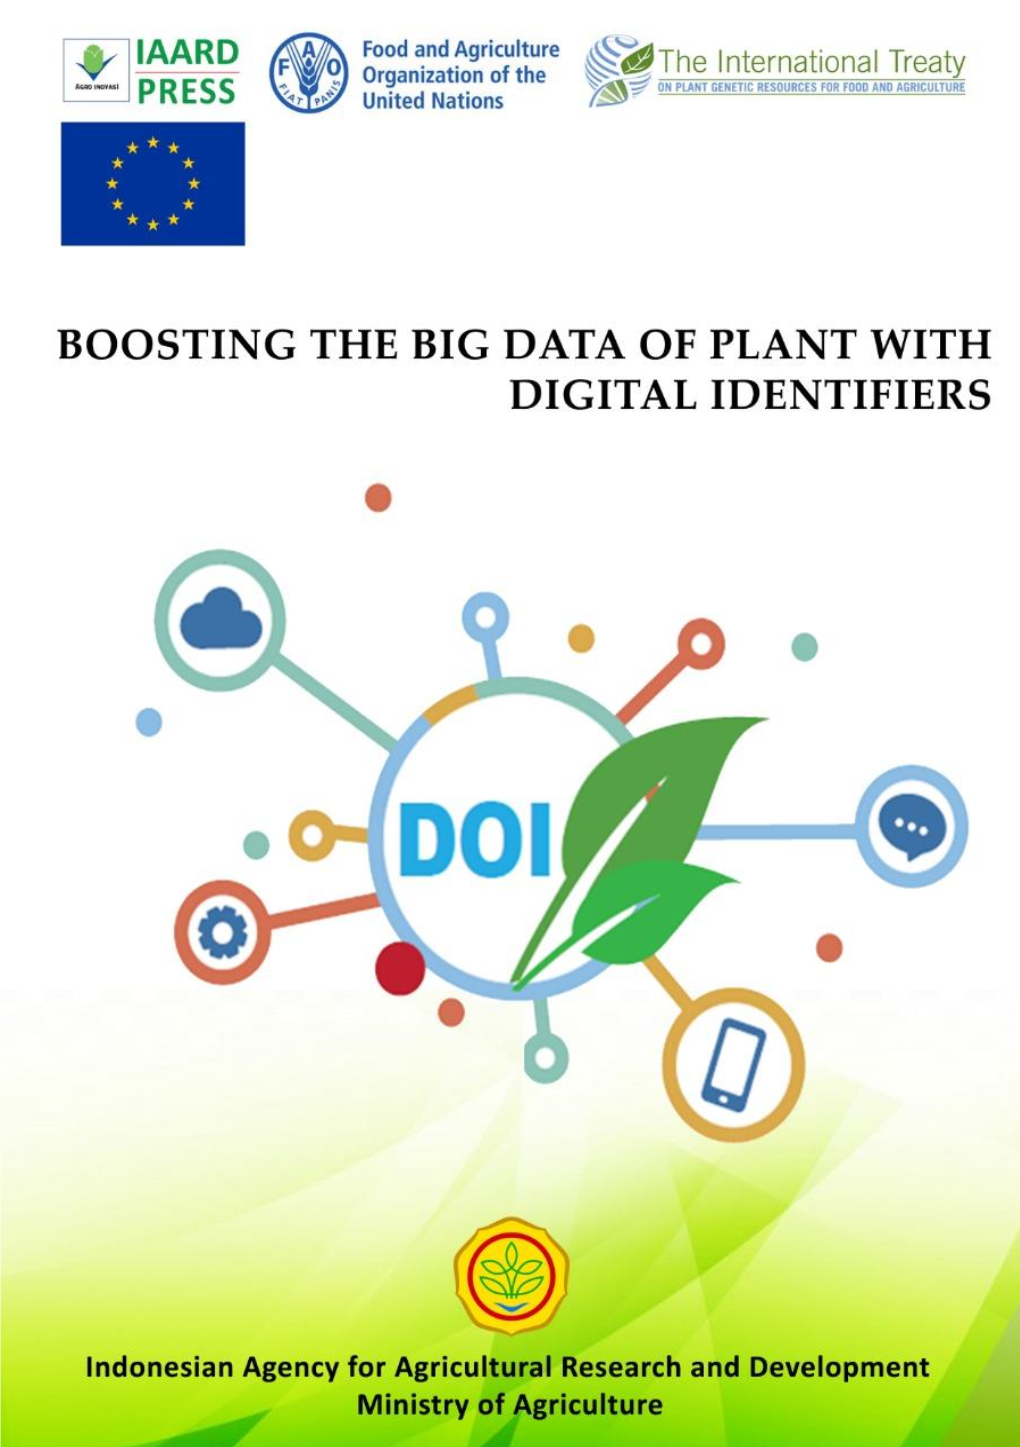 Boosting the Big Data of Plant with Digital Identifiers